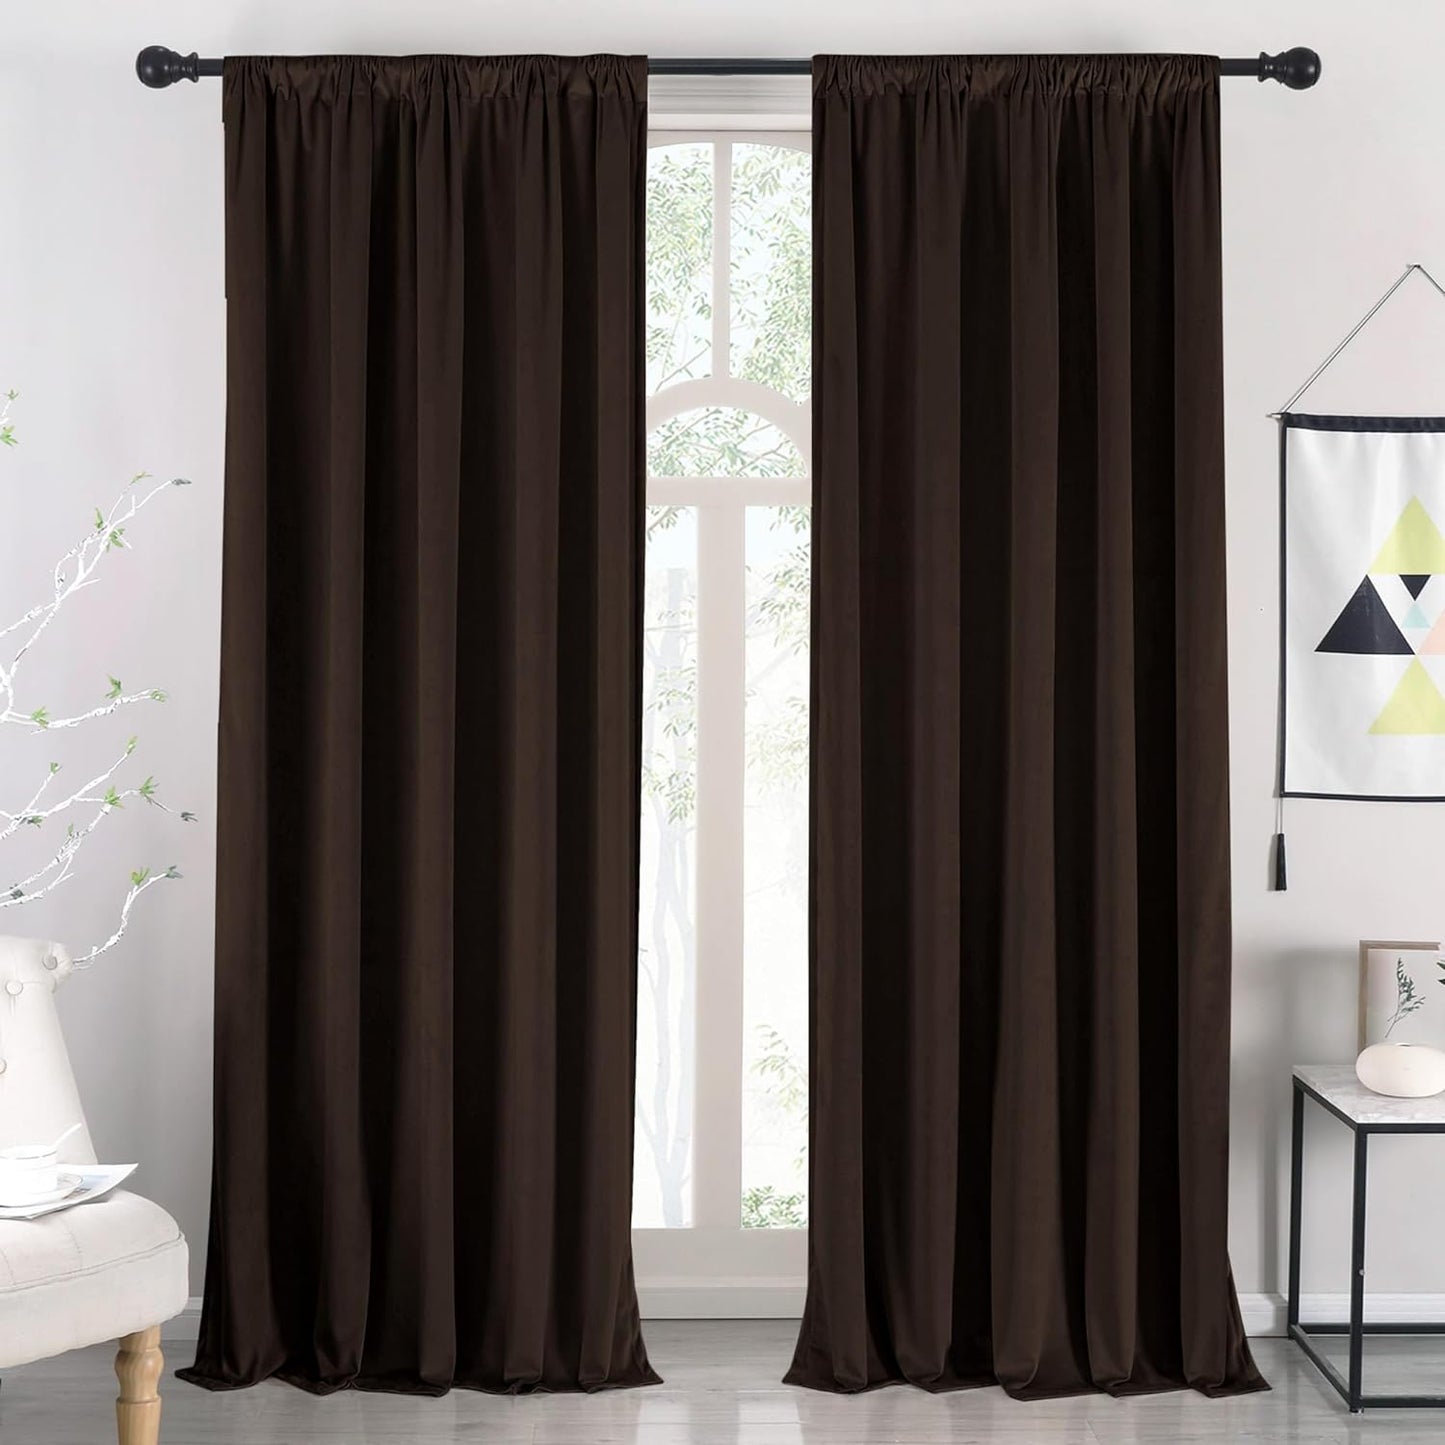 Nanbowang Green Velvet Curtains 63 Inches Long Dark Green Light Blocking Rod Pocket Window Curtain Panels Set of 2 Heat Insulated Curtains Thermal Curtain Panels for Bedroom  nanbowang Brown 52"X84" 